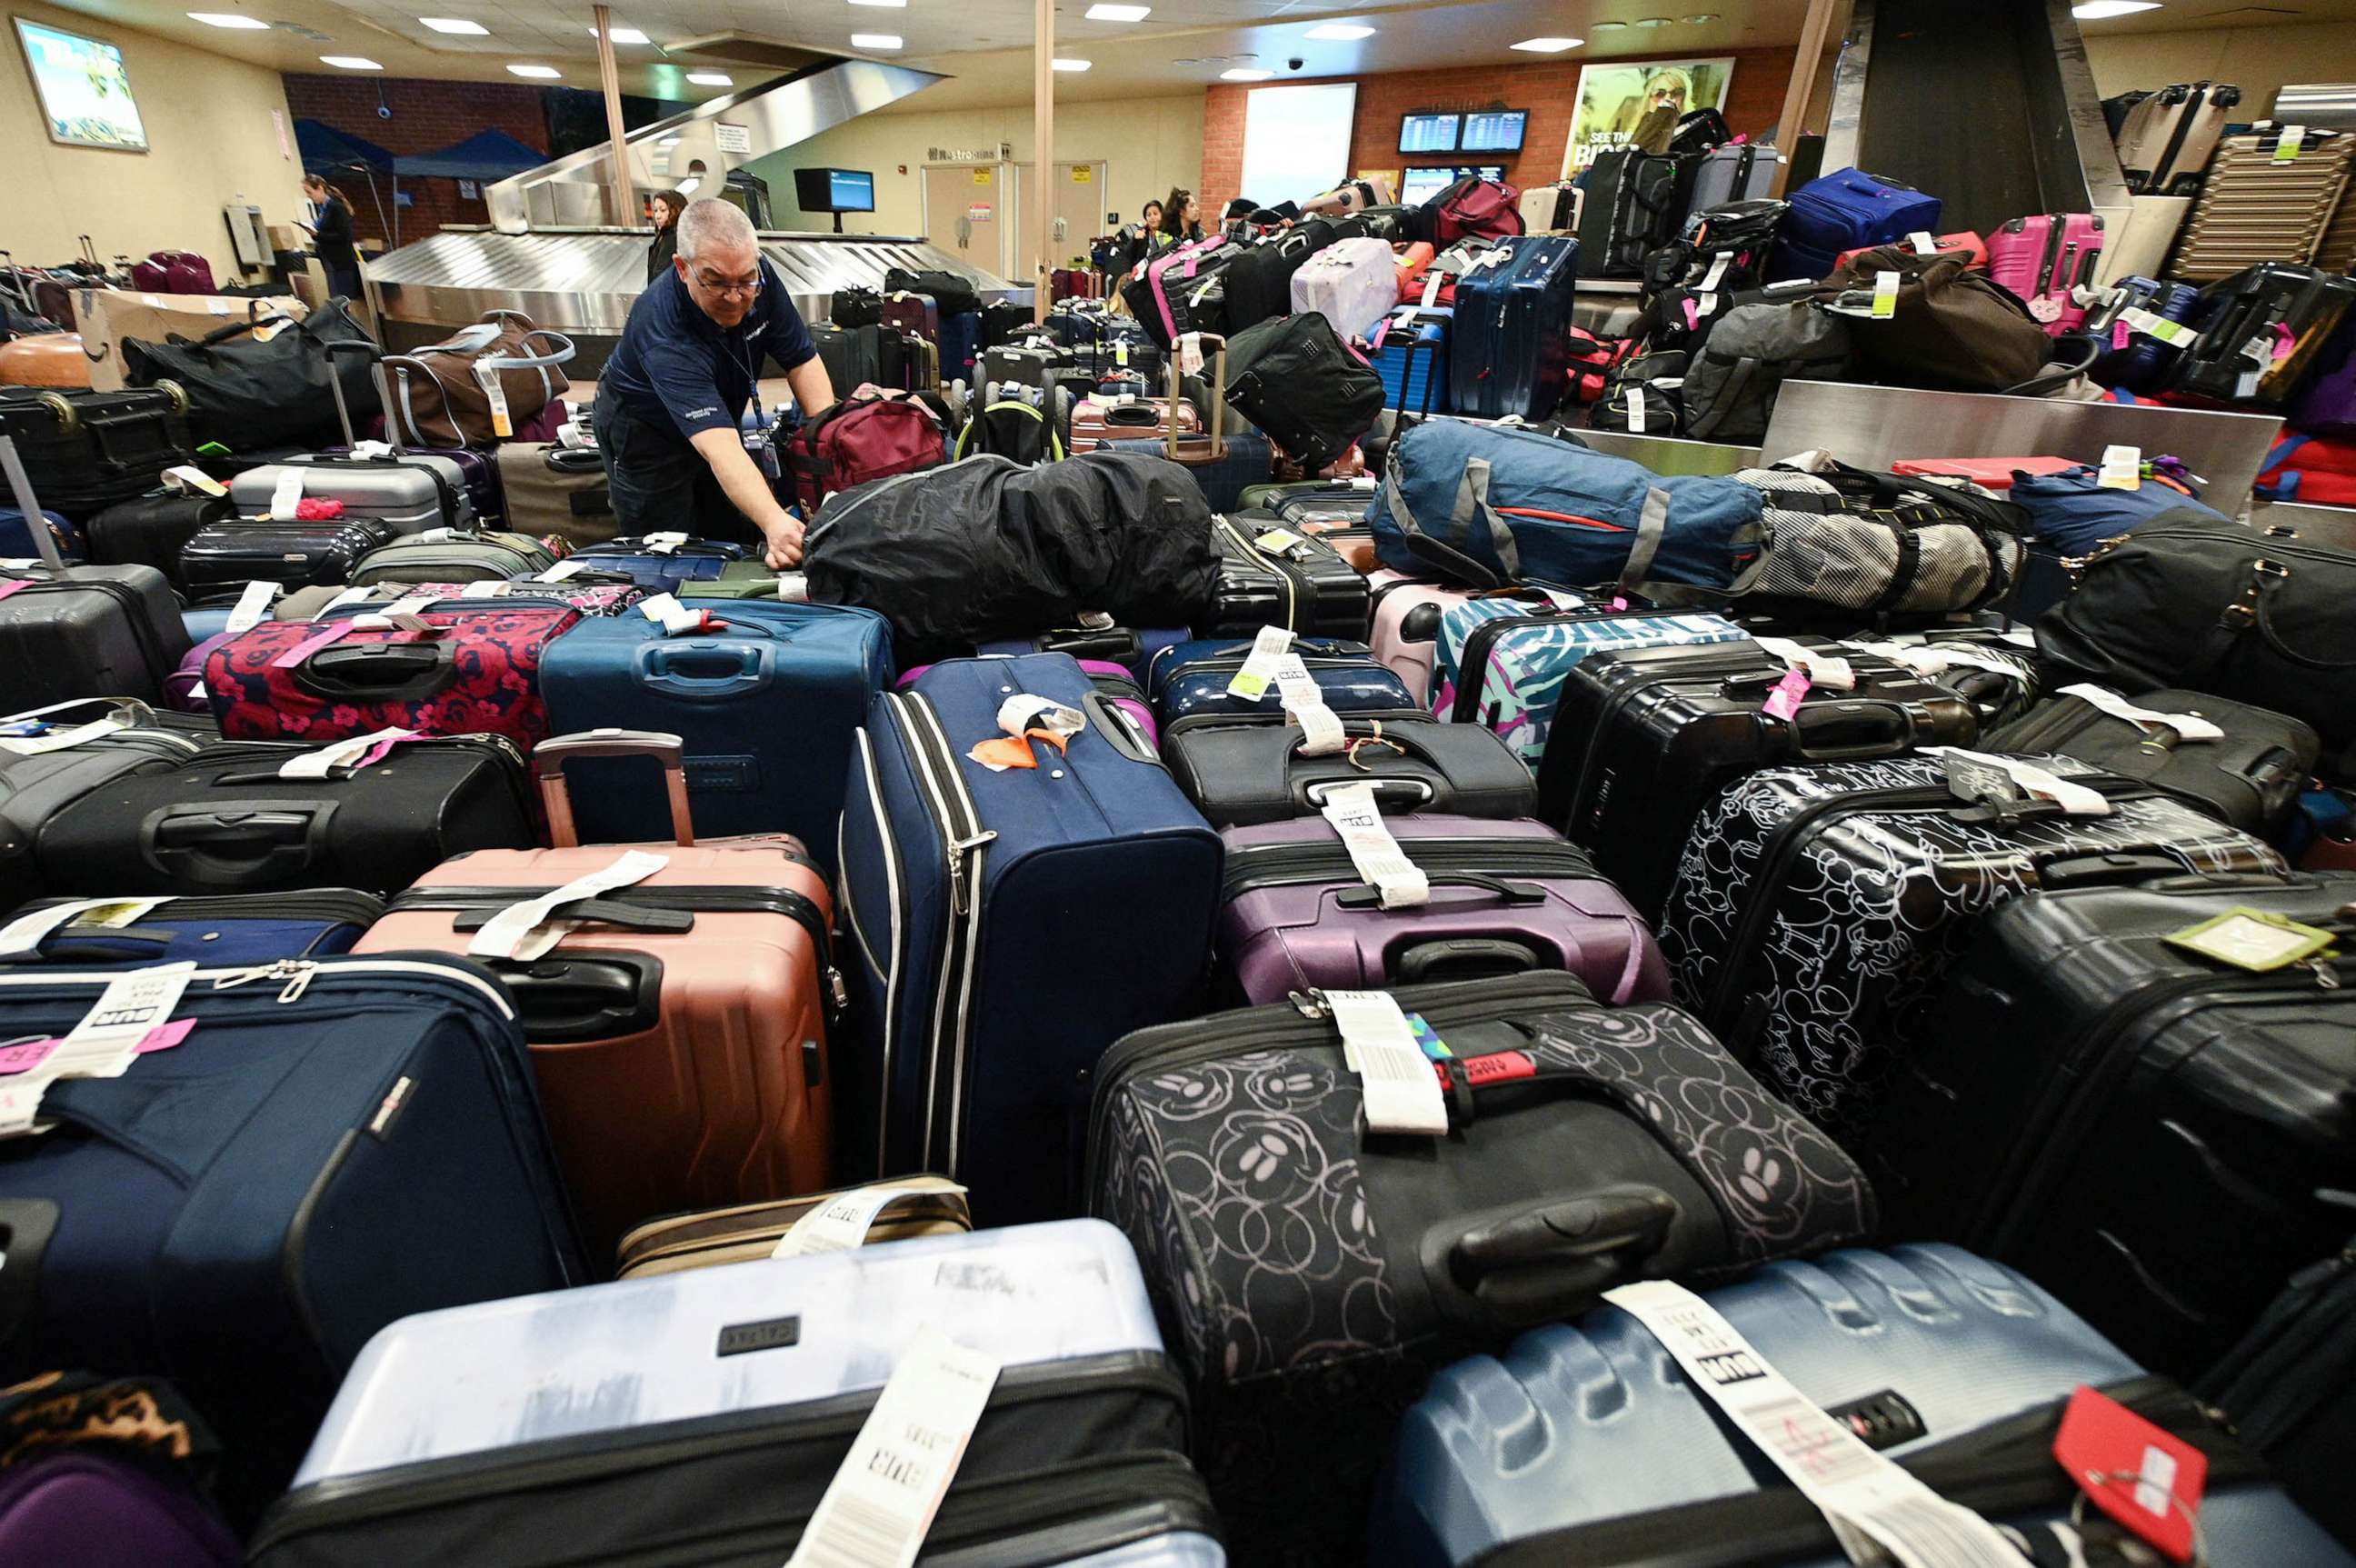 PHOTO: A Southwest Airlines employee sorts through unclaimed luggage at Hollywood Burbank Airport in Burbank, California, Dec. 27, 2022.